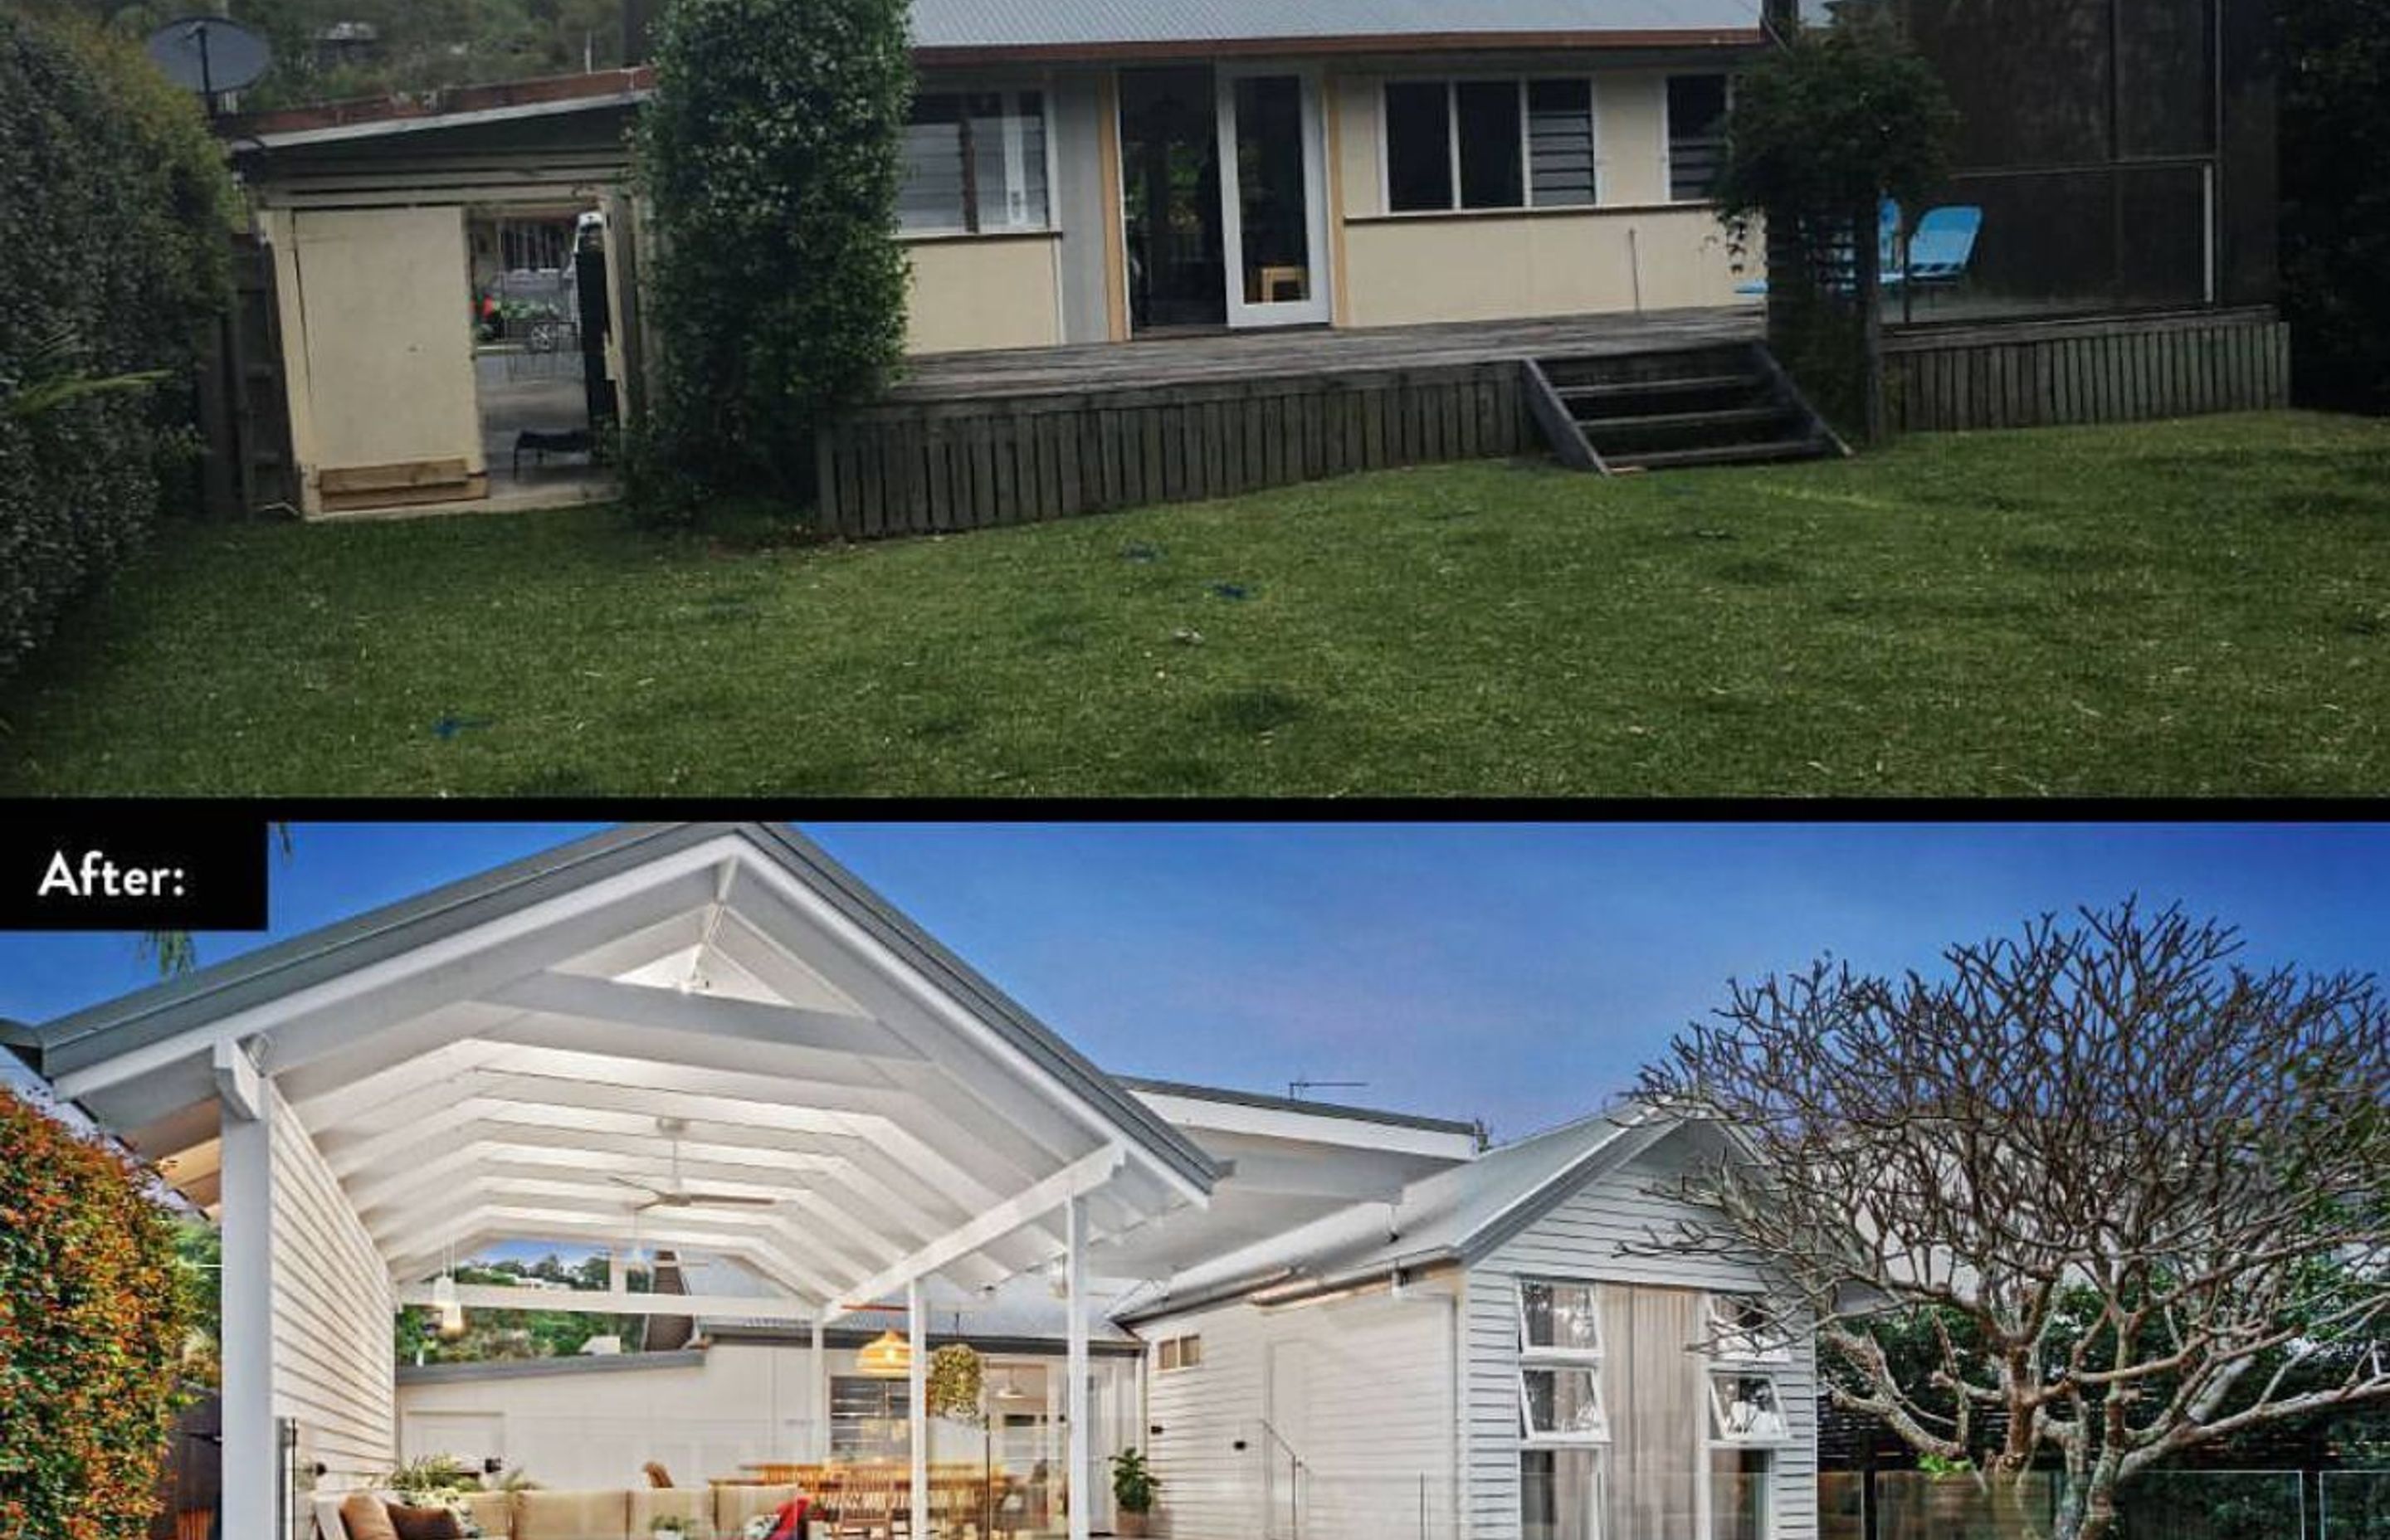 Before and After Images of the house renovation and extension.